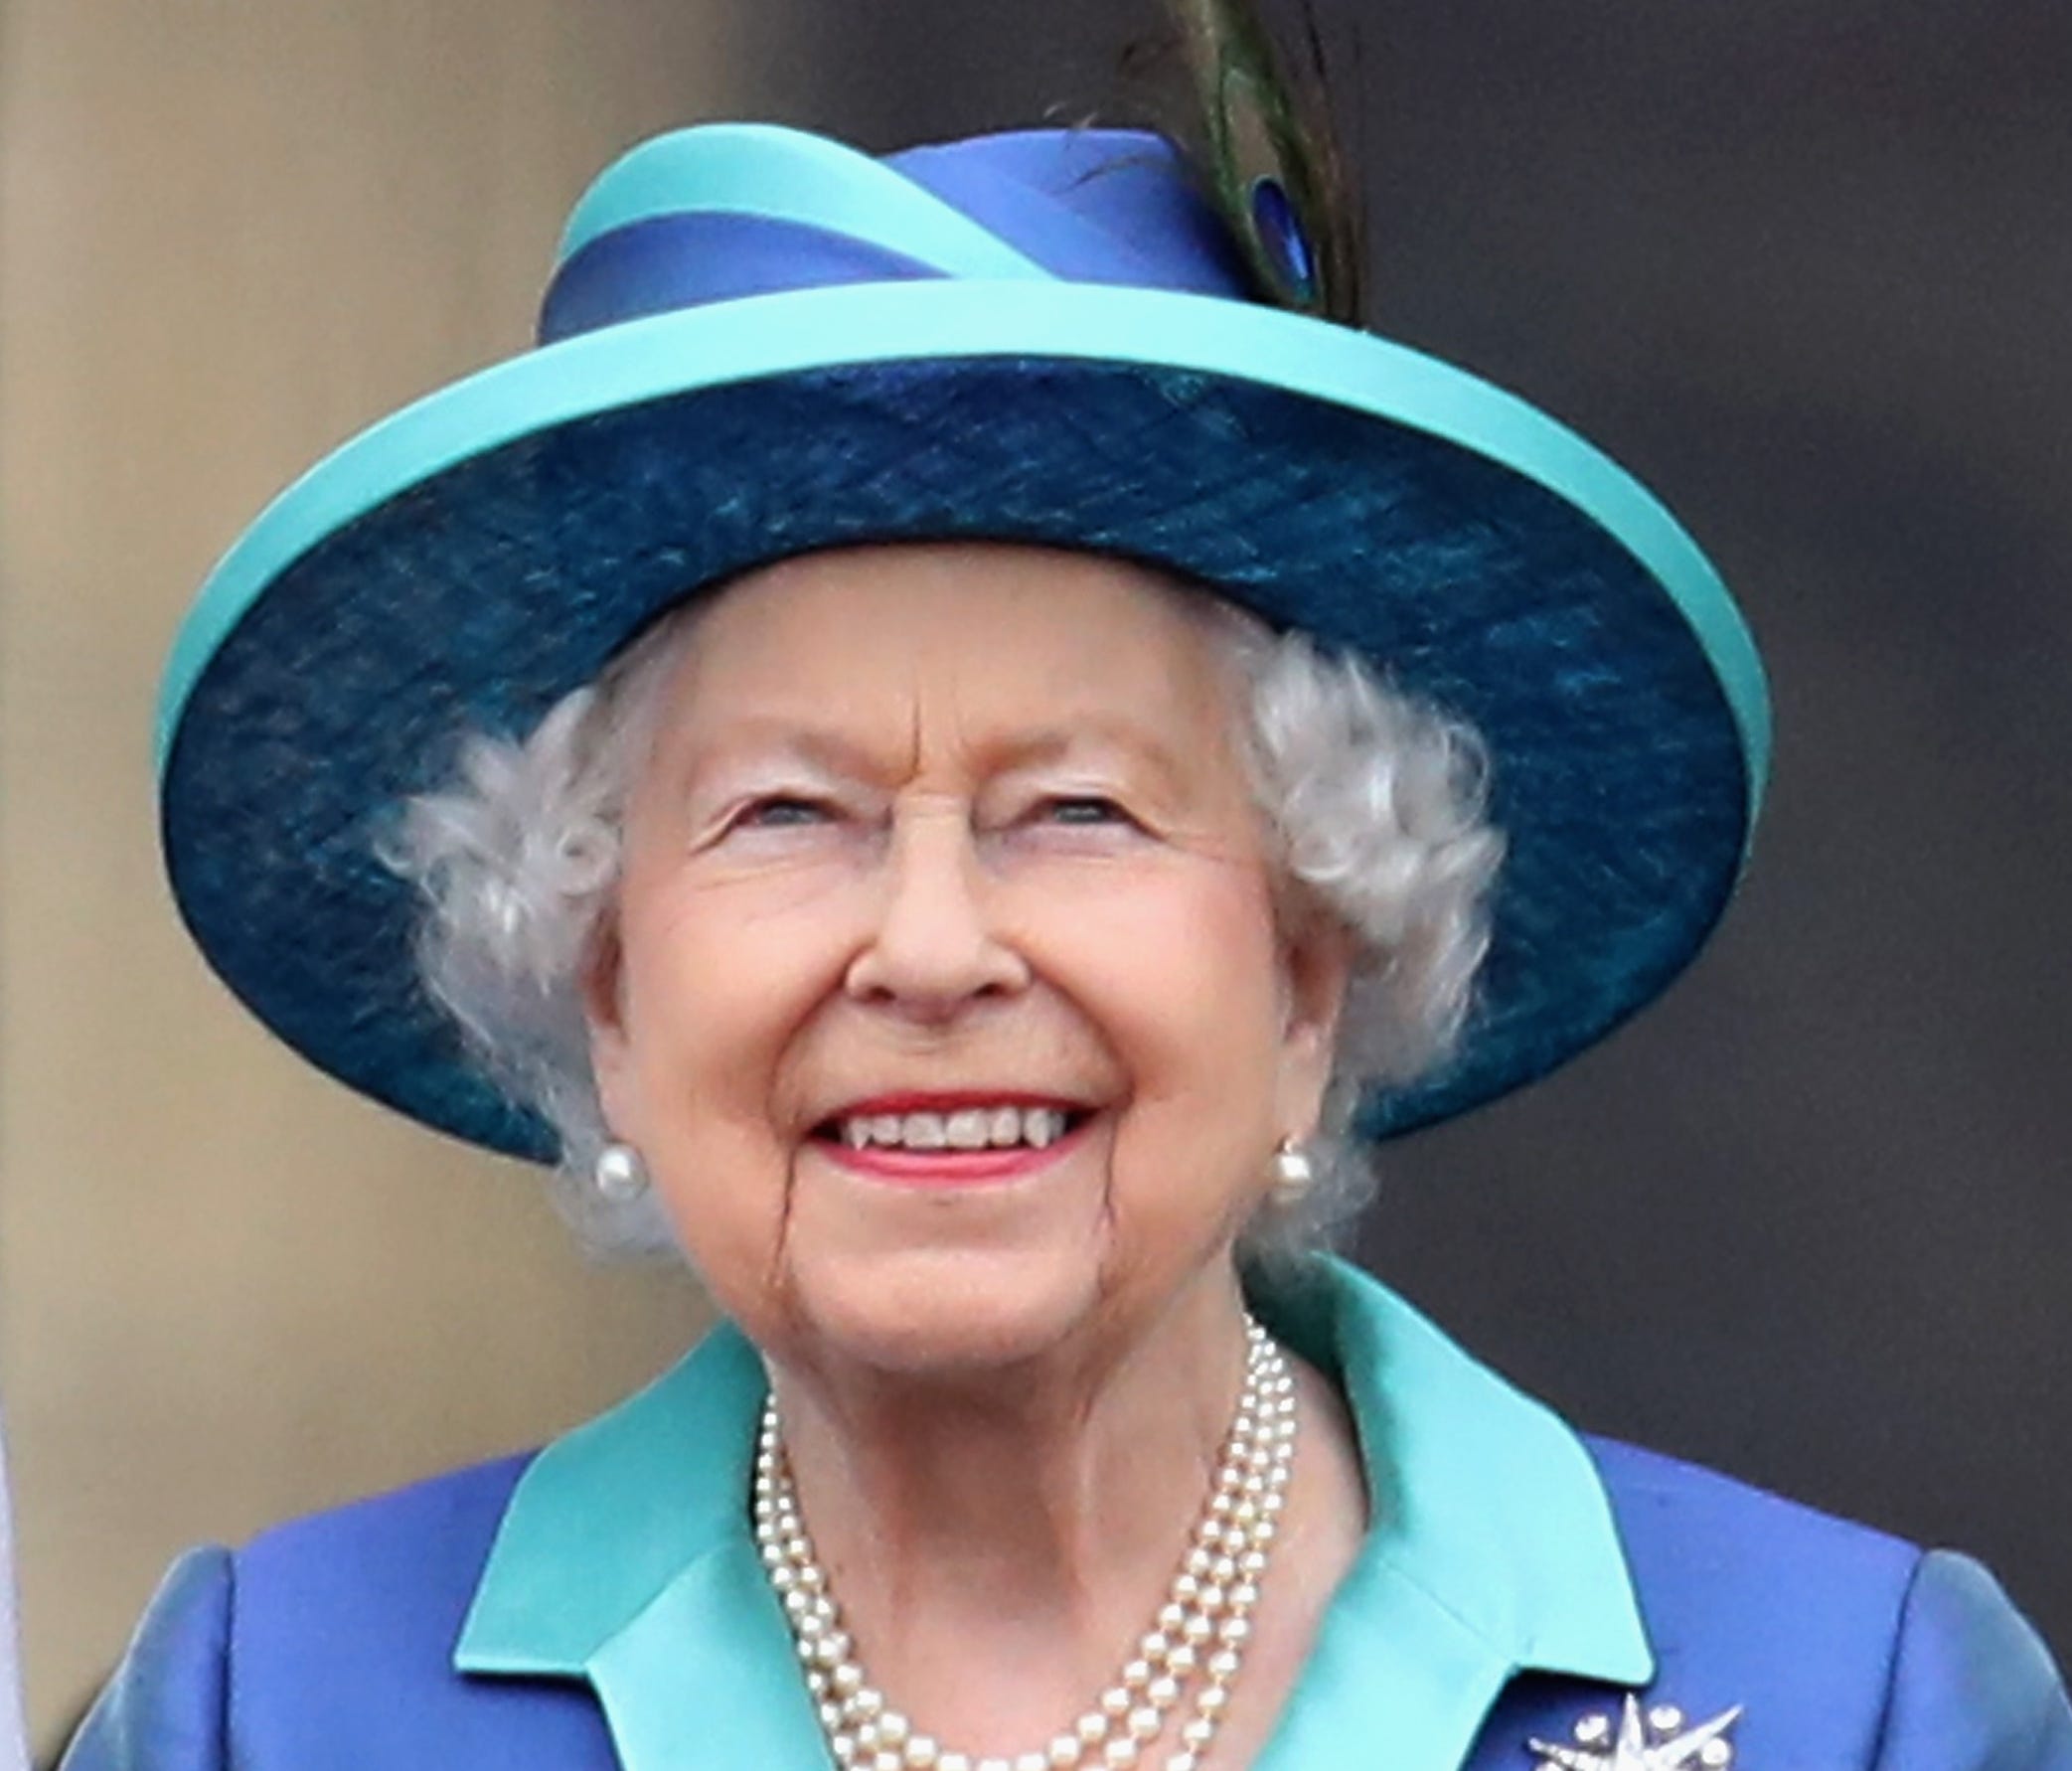 Queen Elizabeth II watches the Royal Air Force fly past the balcony of Buckingham Palace, as members of the Royal Family attend events to mark the centenary of the RAF on Tuesday in London.